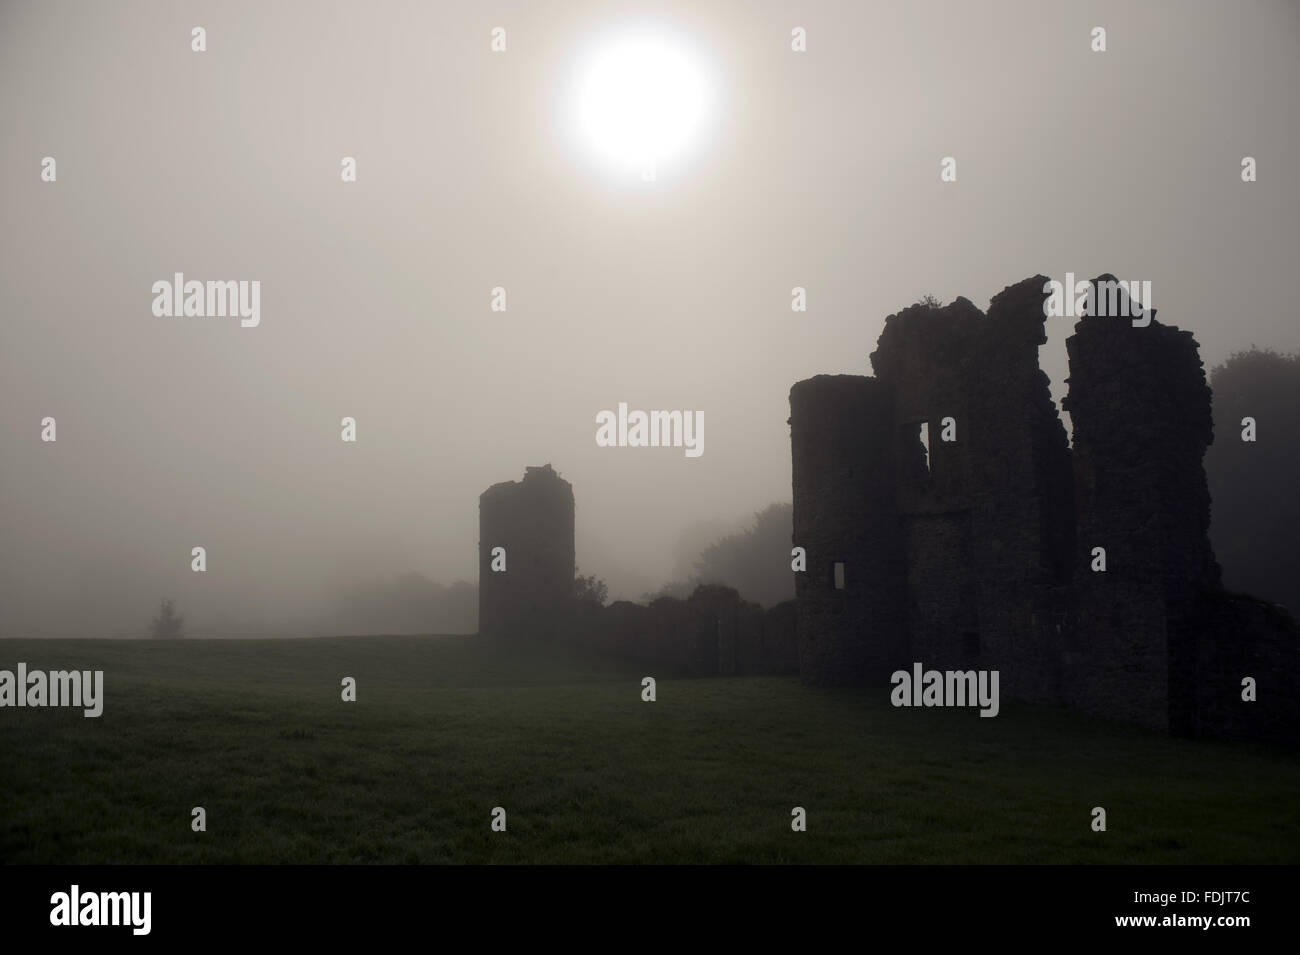 Misty view of the ruins of the old tower-house at Crom, Co. Fermanagh, Northern Ireland. Stock Photo